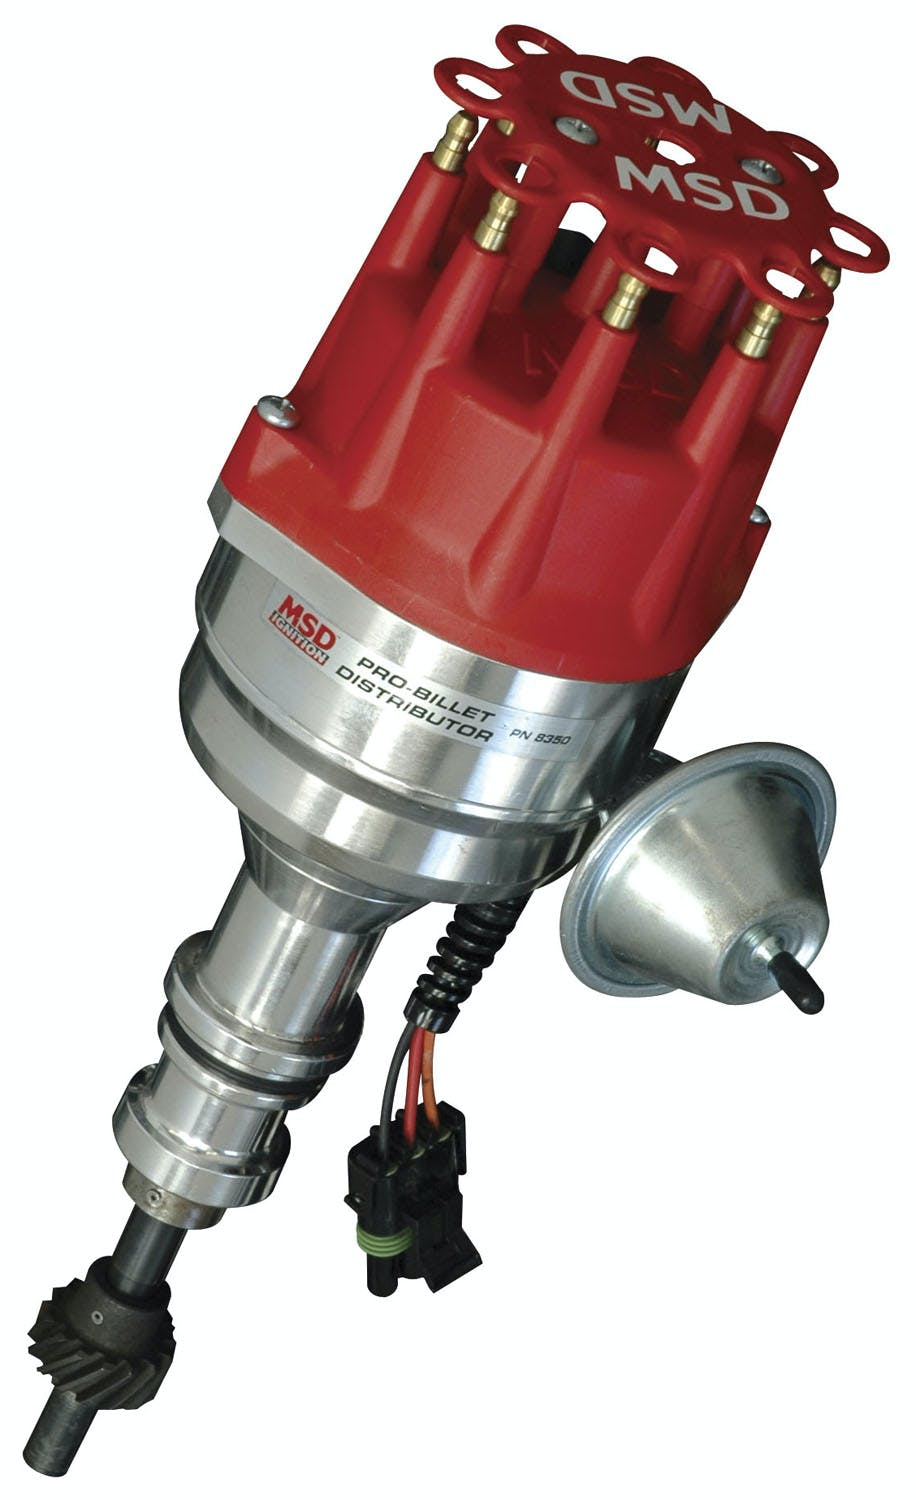 MSD Performance 8350 Distributor, Ford 351C-460, Ready-To-Run